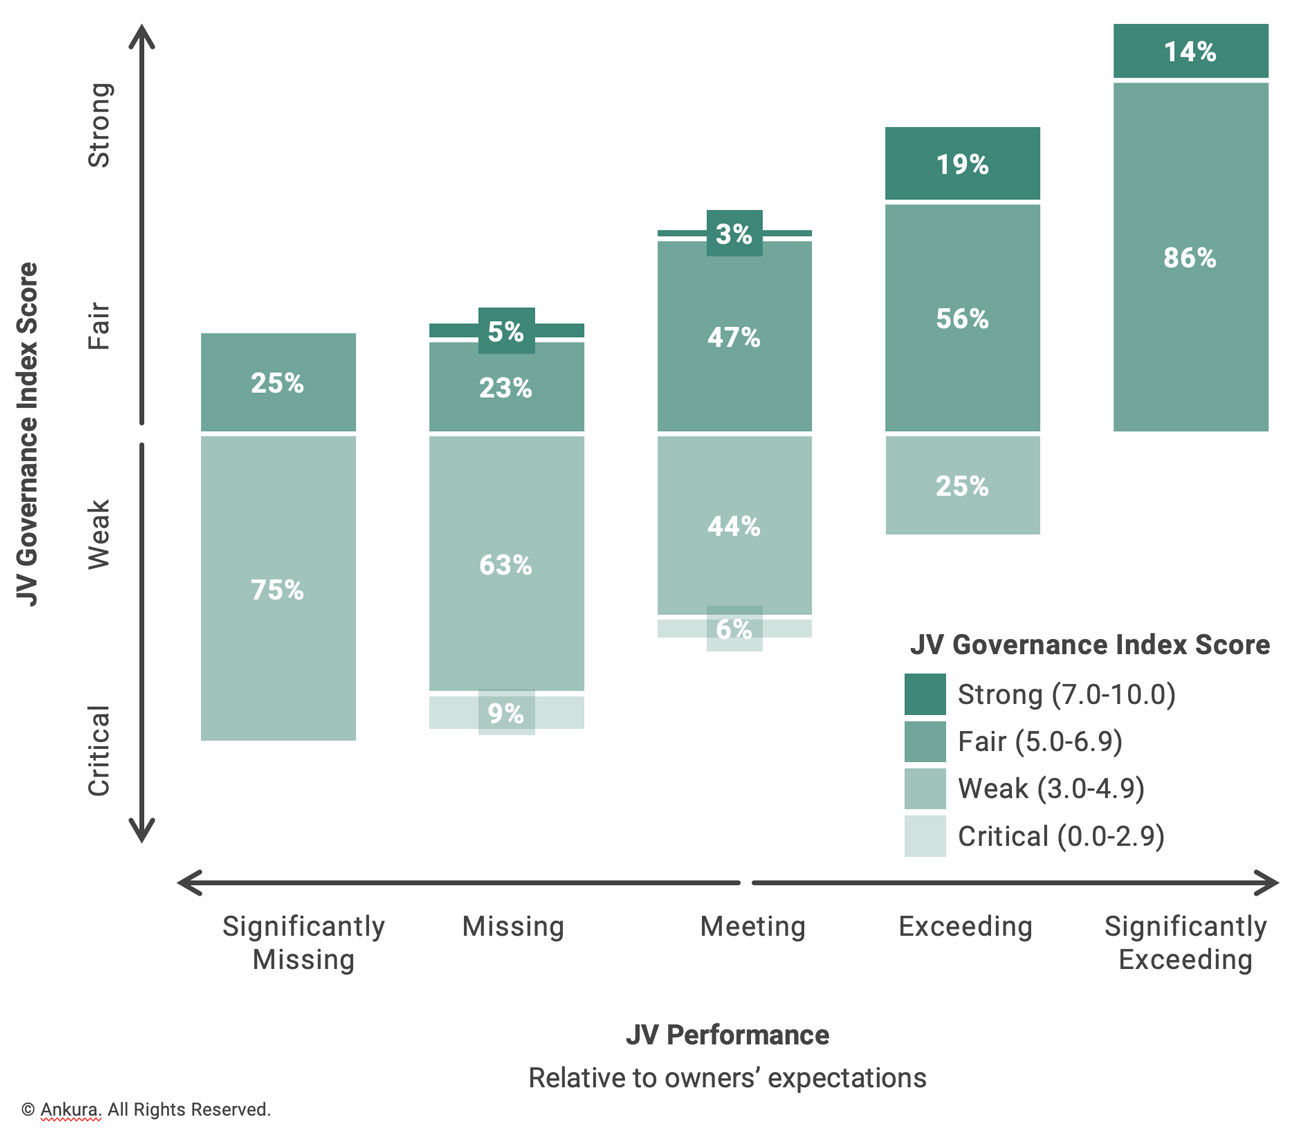 Exhibit 2: Joint Venture Governance Index Score and Outcome